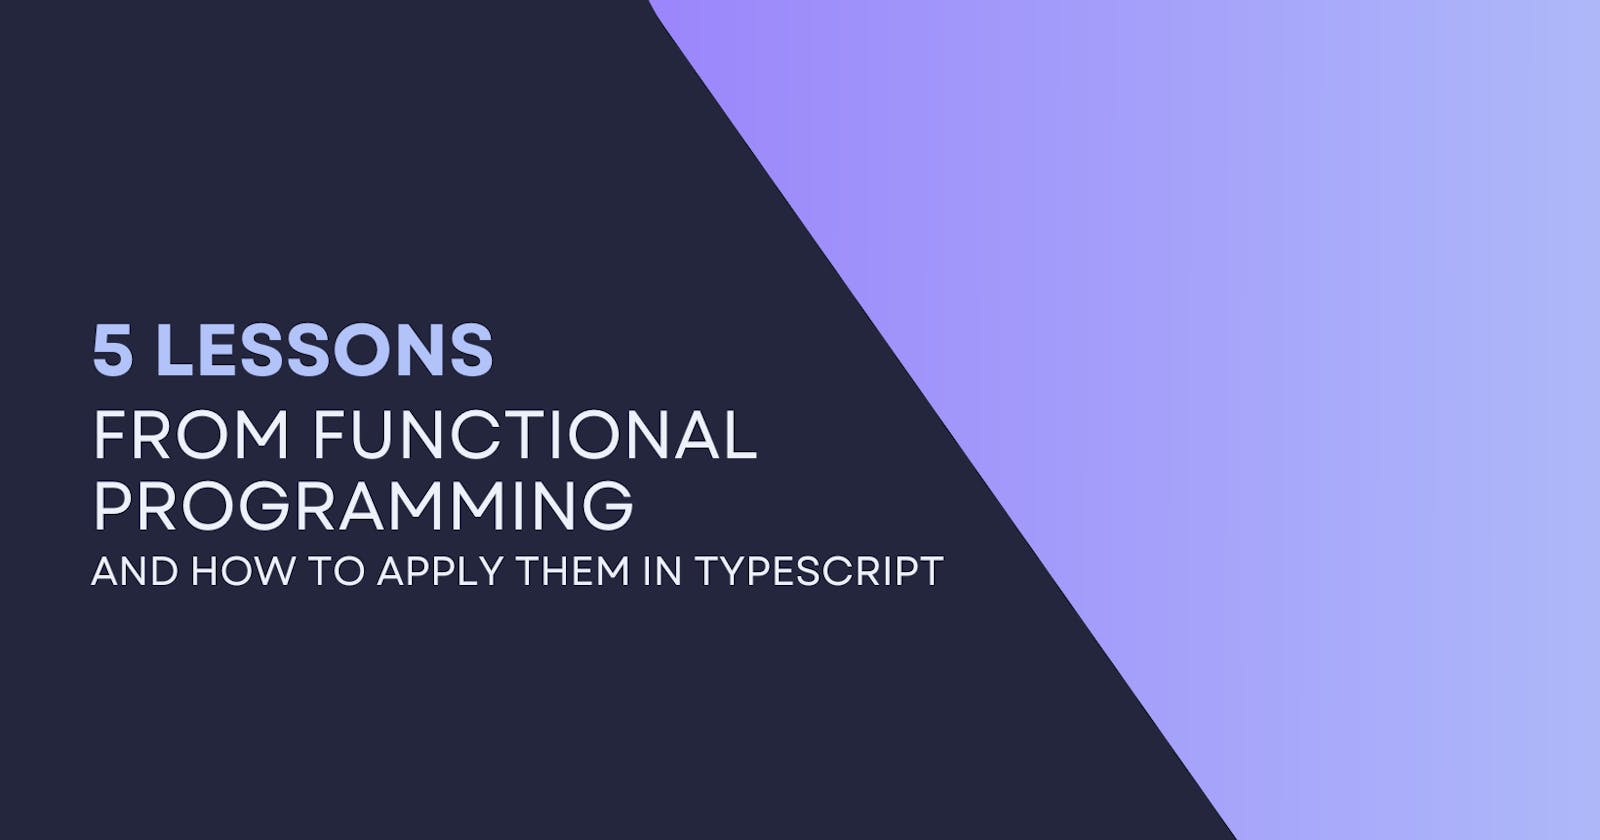 5 lessons I've learned from functional programming as a TypeScript developer